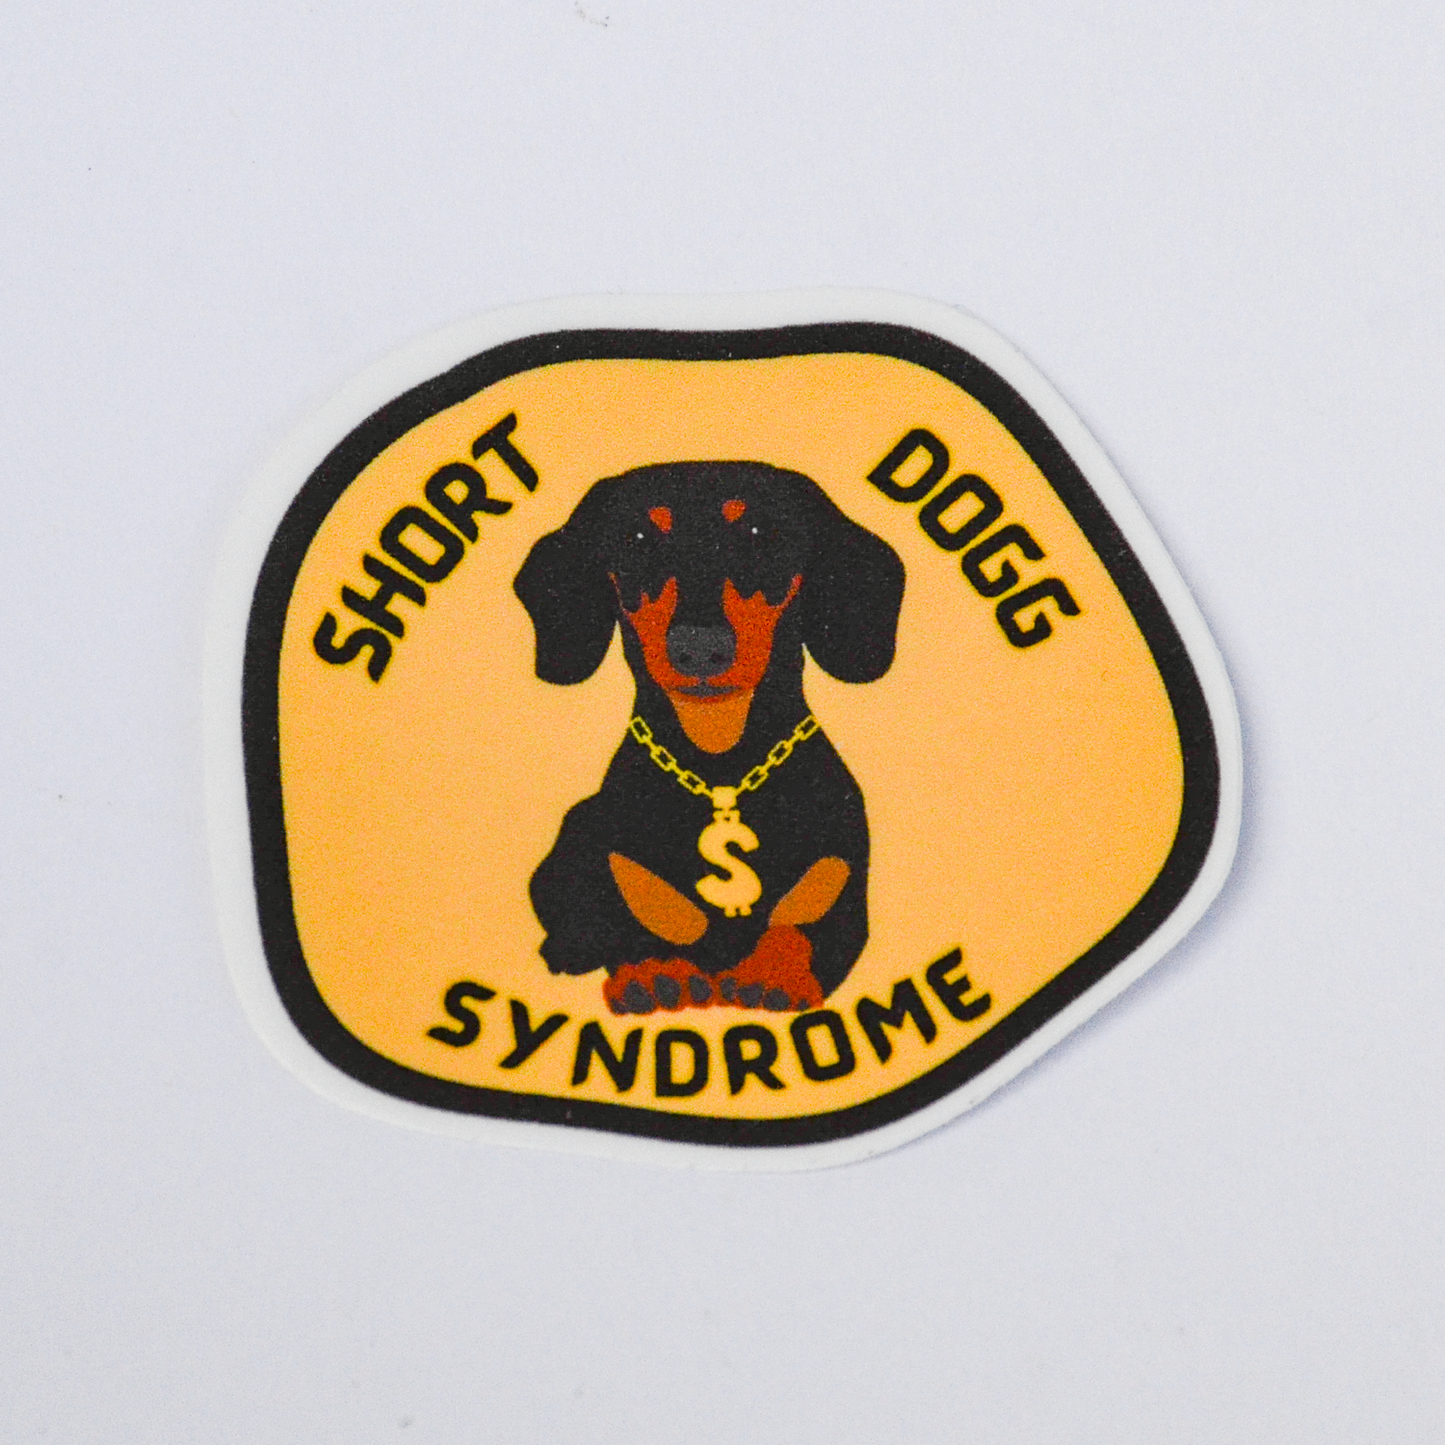 short dogg syndrome funny wiener dog sausage dog sticker. Cartoon dachshund wearing a gold chain with a dollar sign